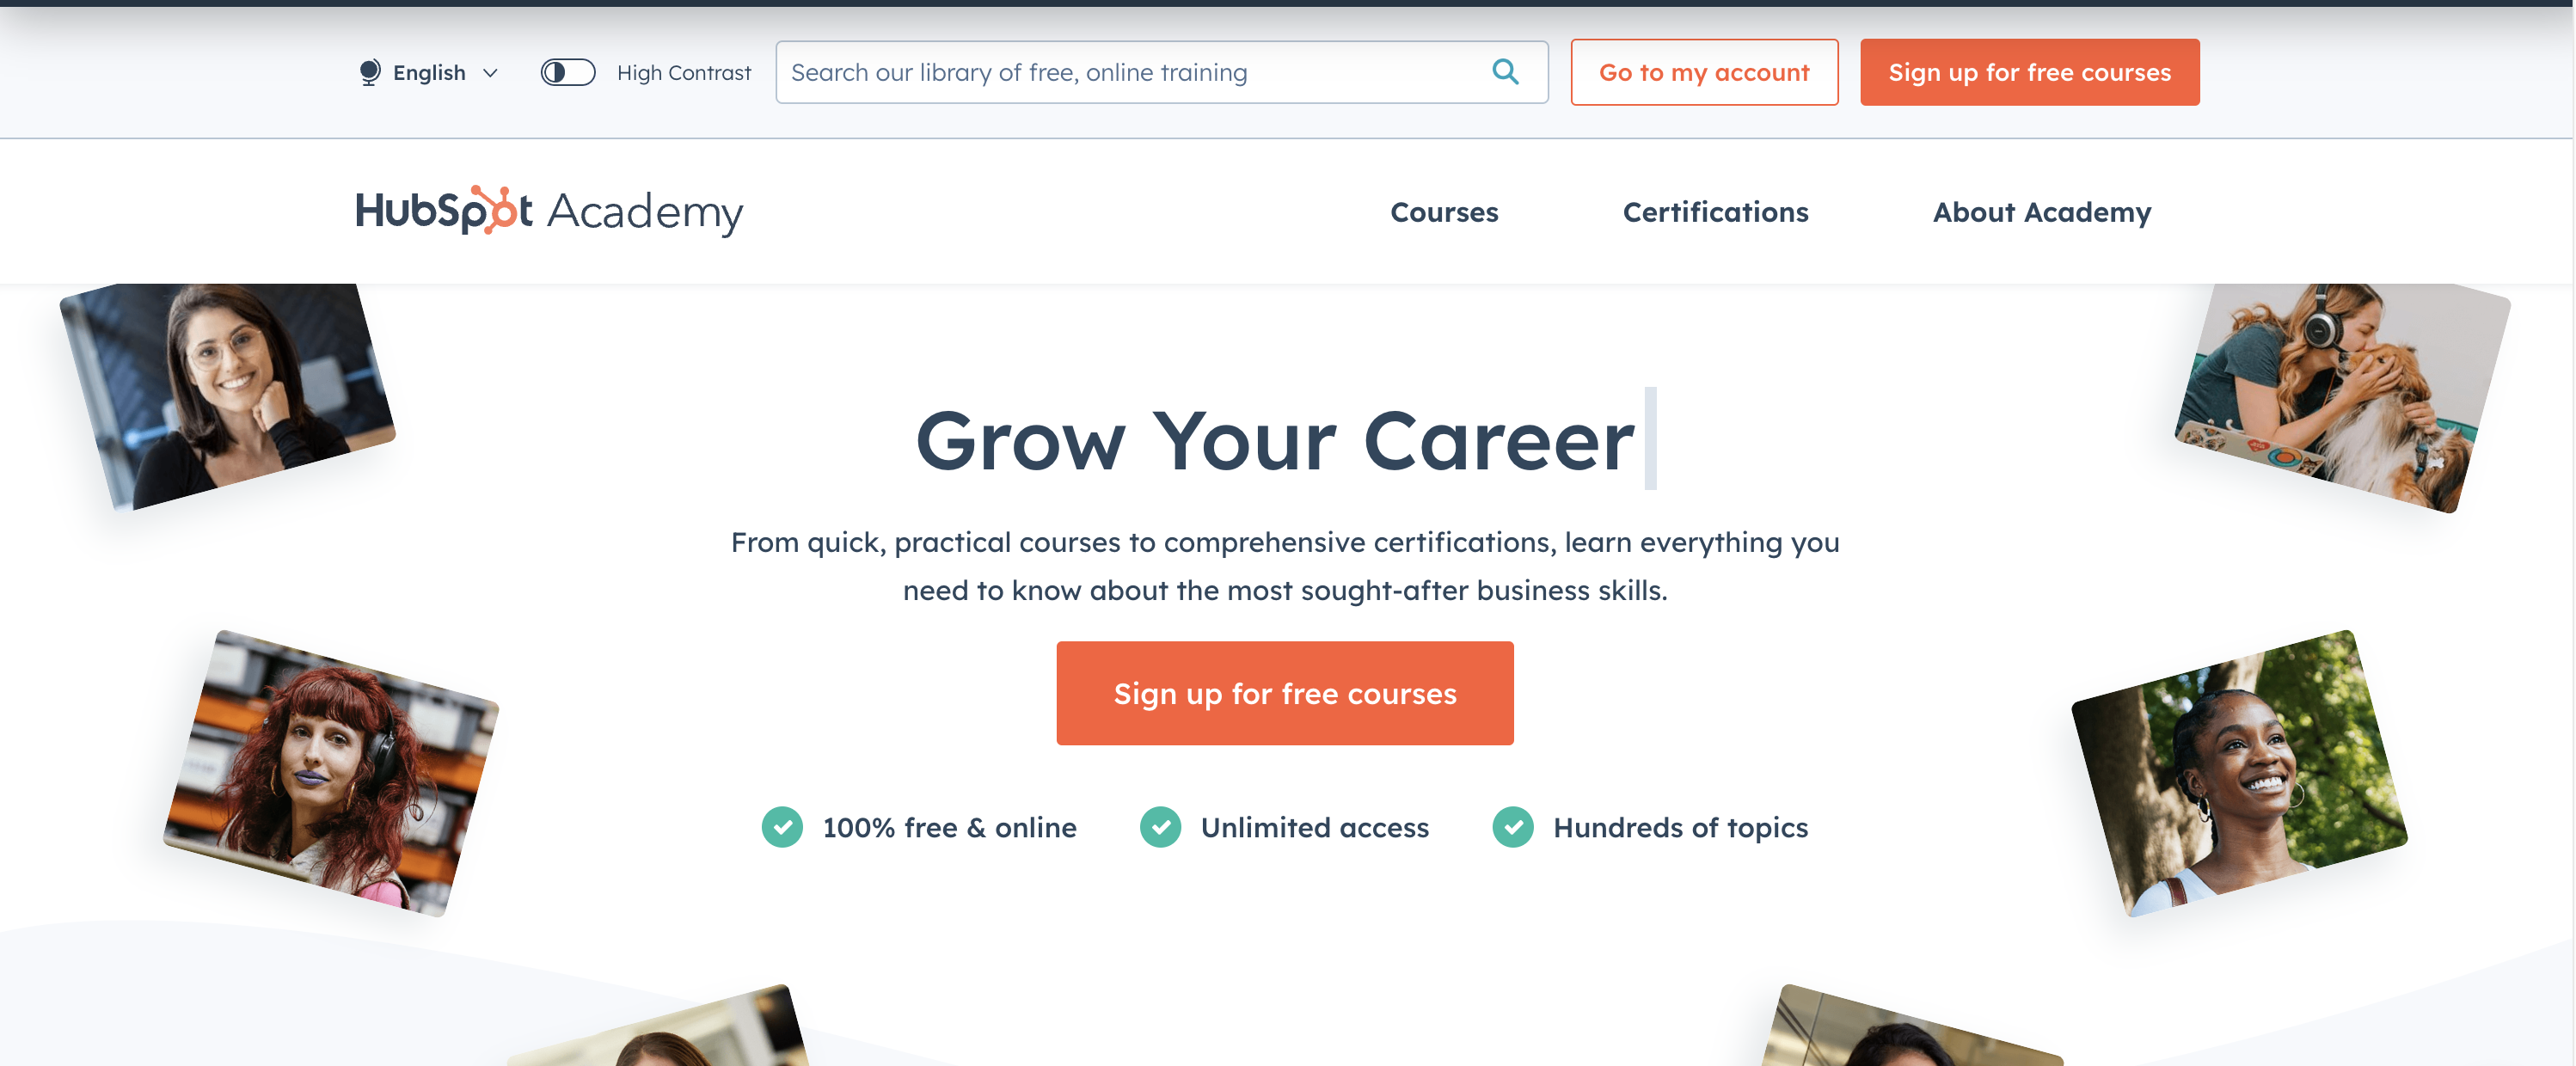 how to improve user experience: HubSpot example 2